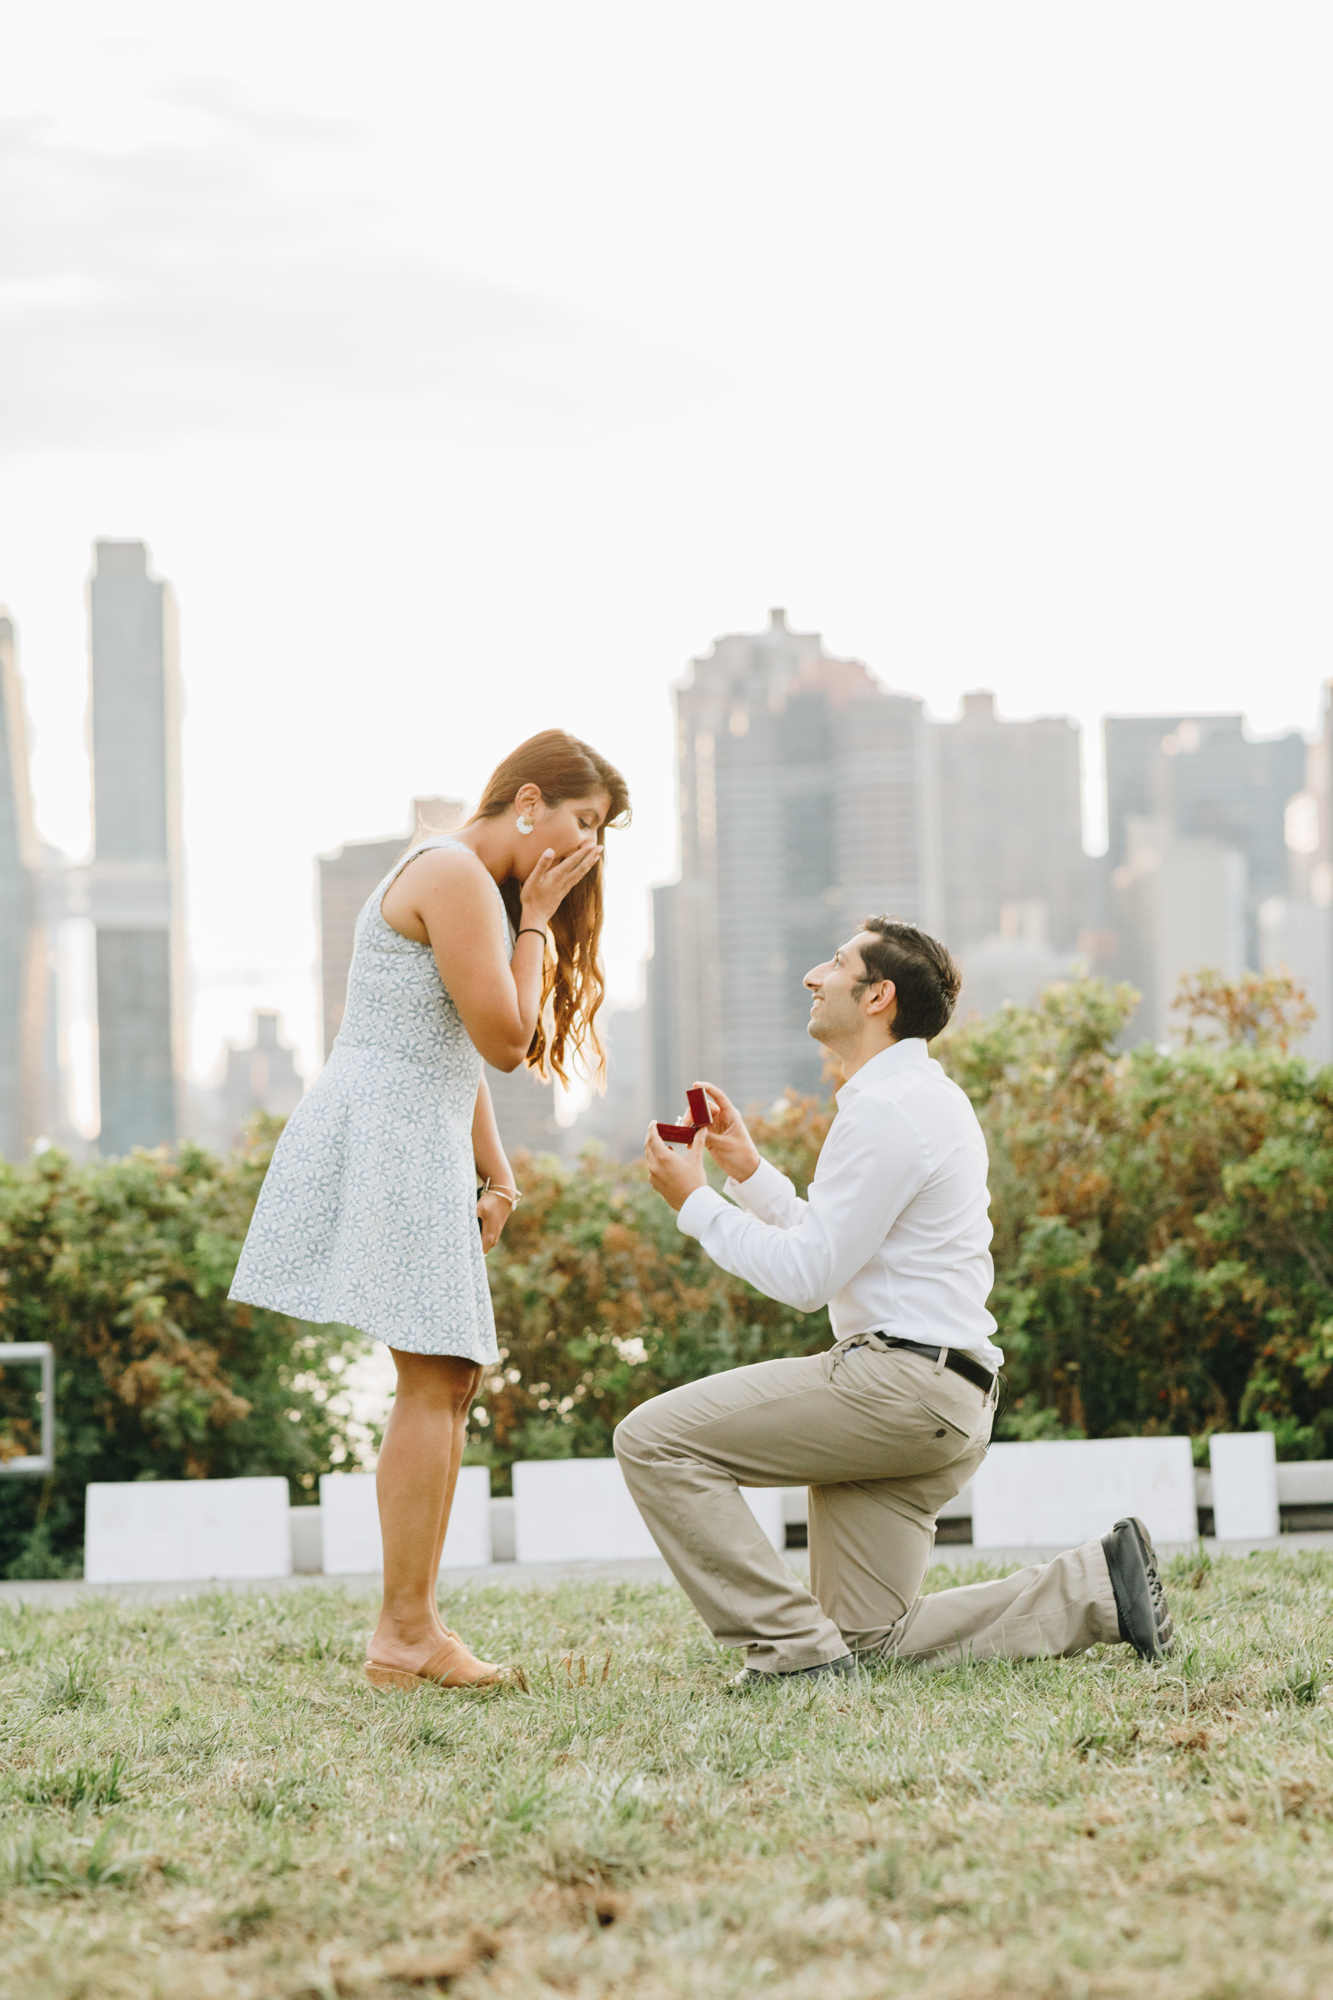 Proposal photography from Gantry Plaza State Park in NYC